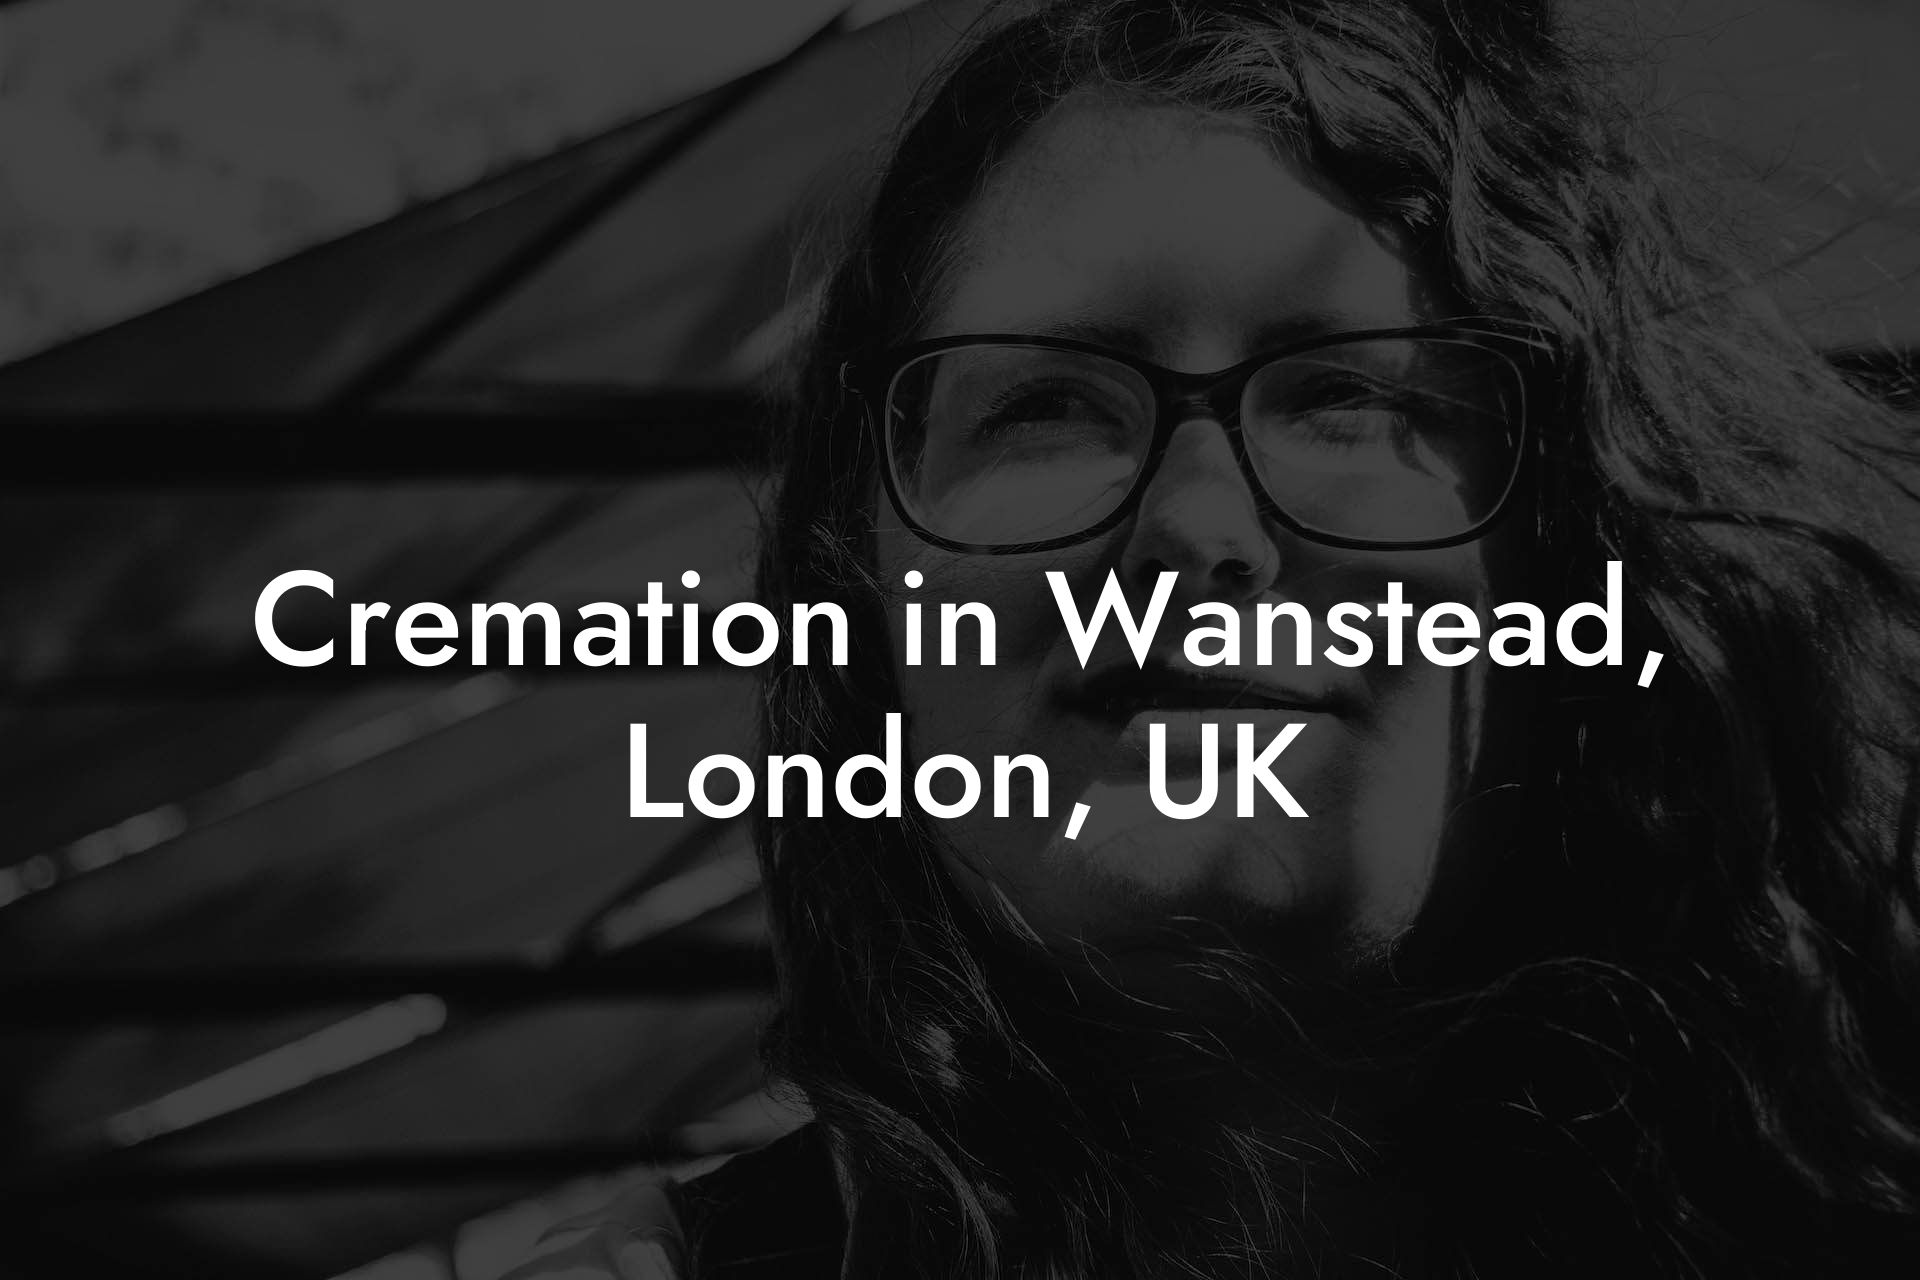 Cremation in Wanstead, London, UK